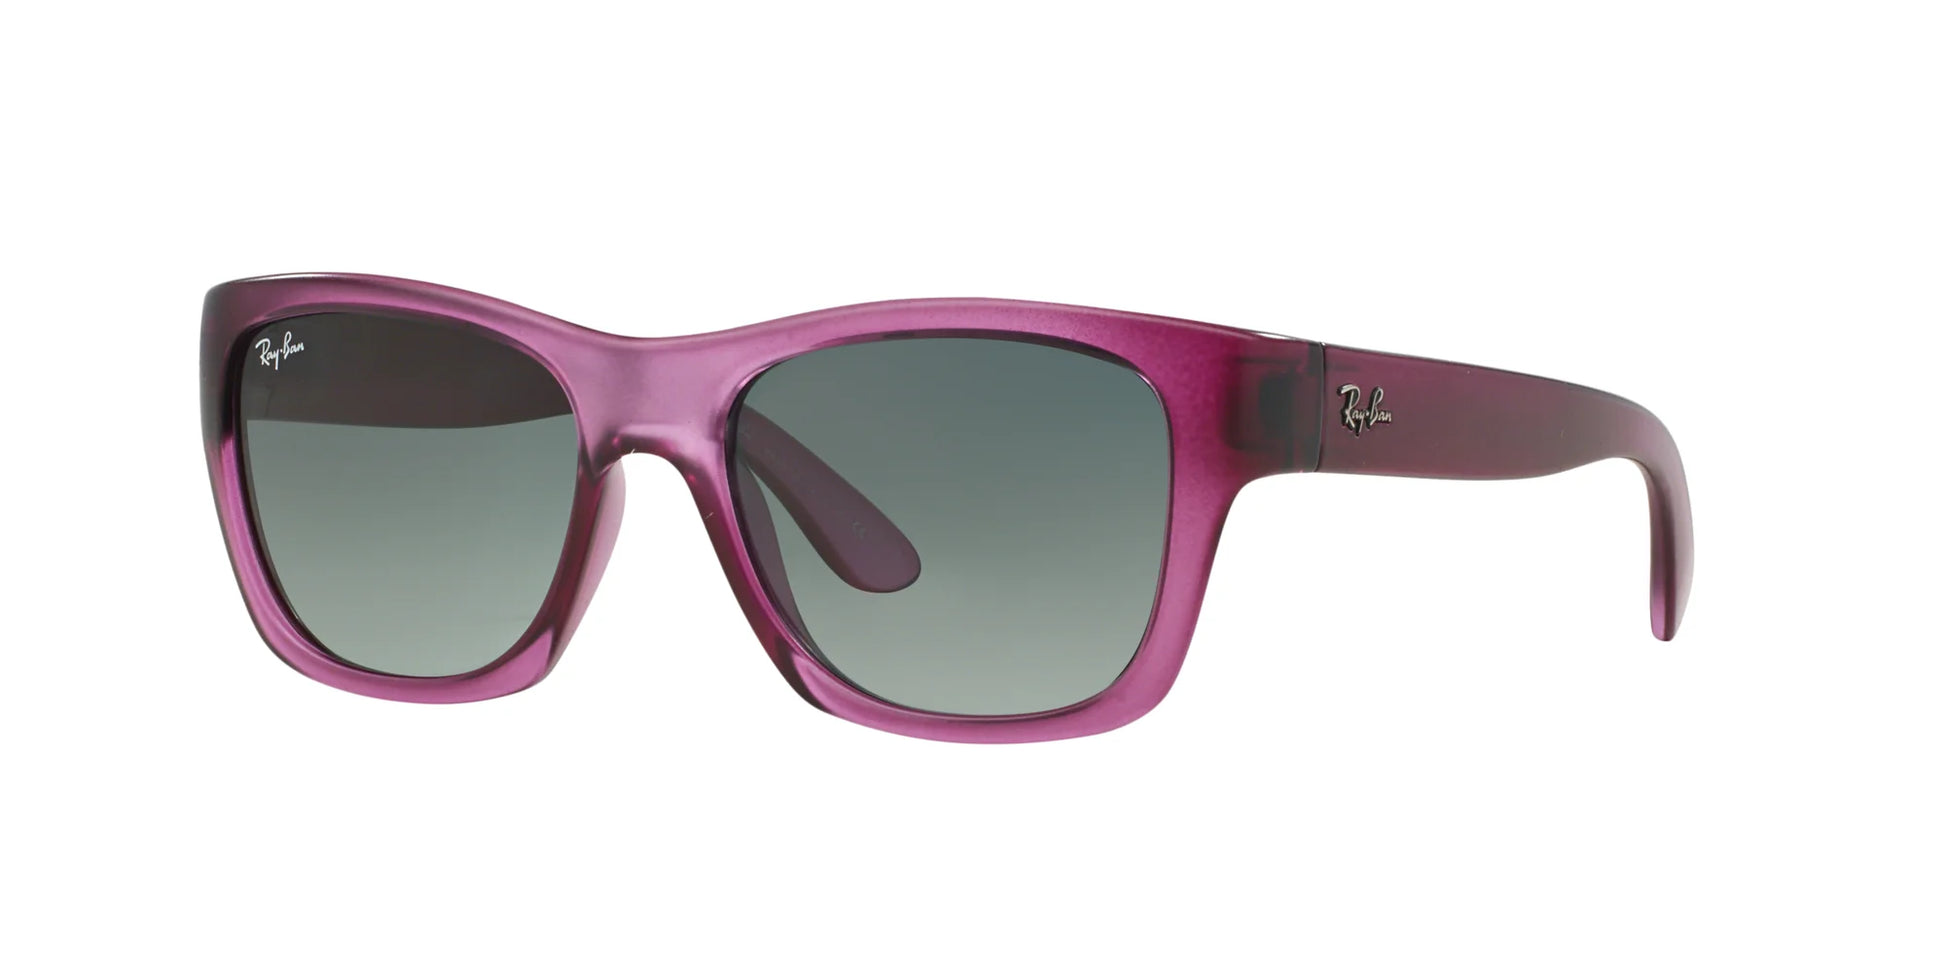 Ray-Ban RB4194 Sunglasses Pink / Grey Gradient